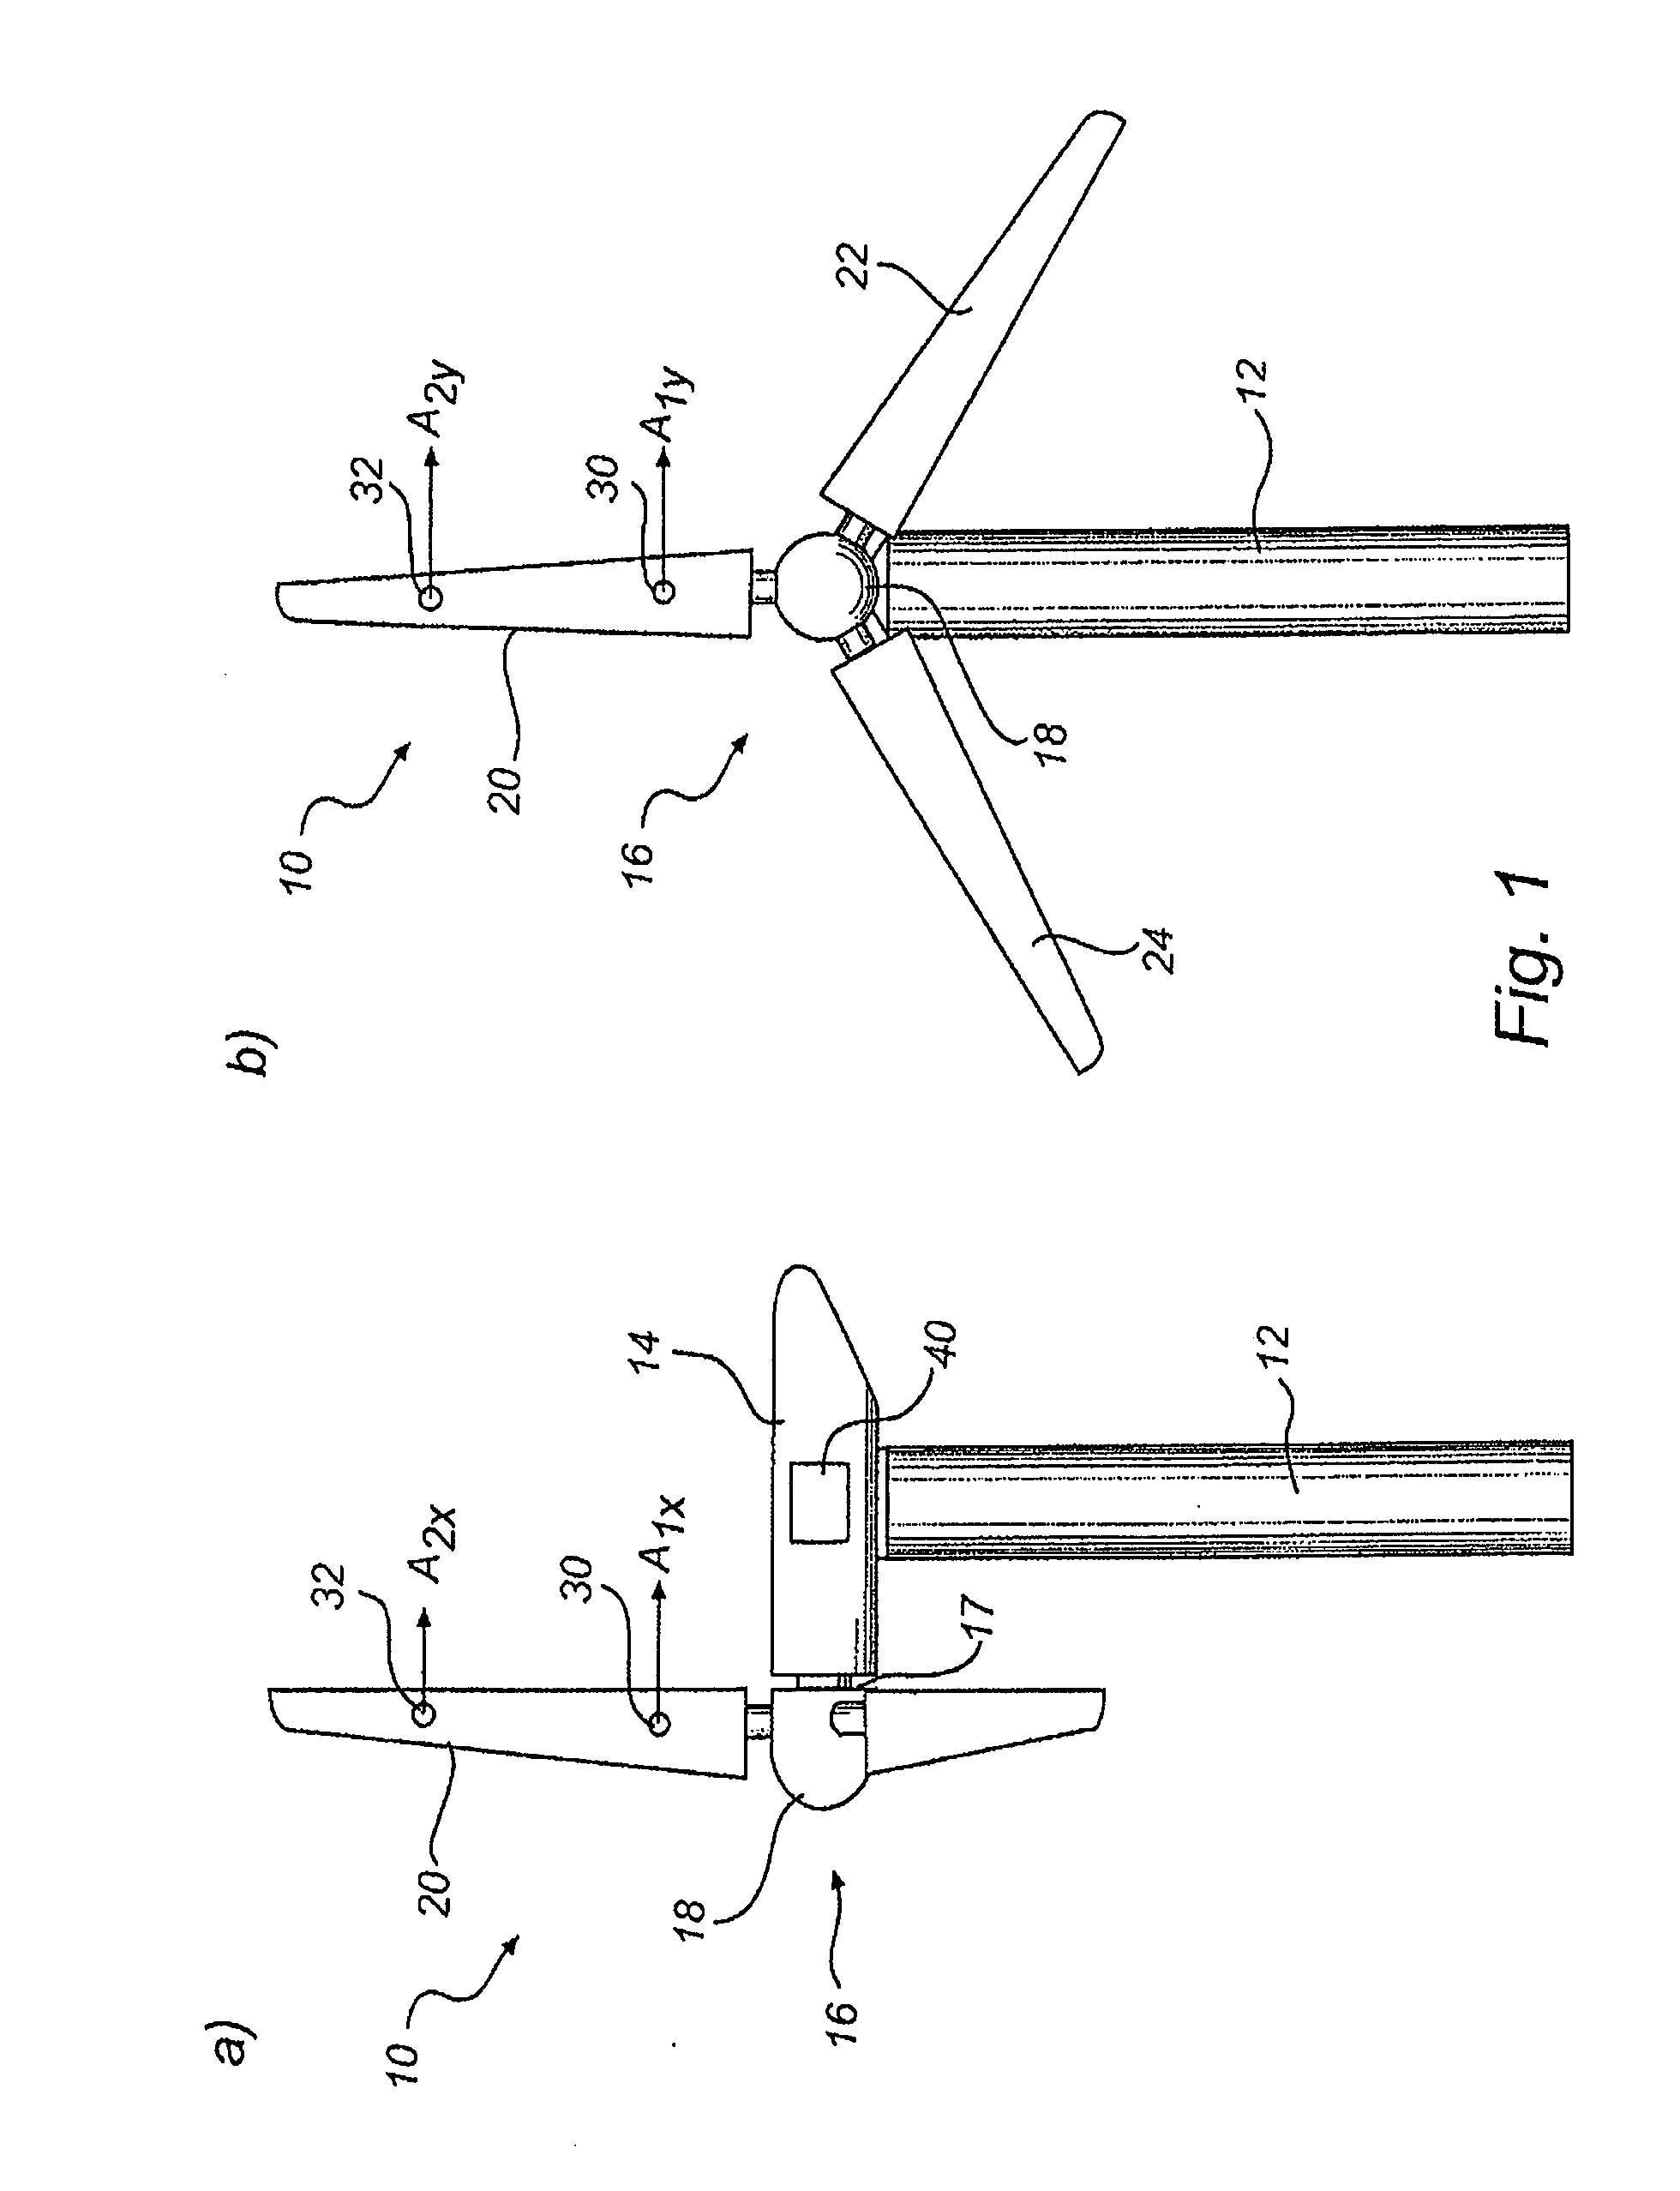  wind turbine and a method for monitoring a wind turbine